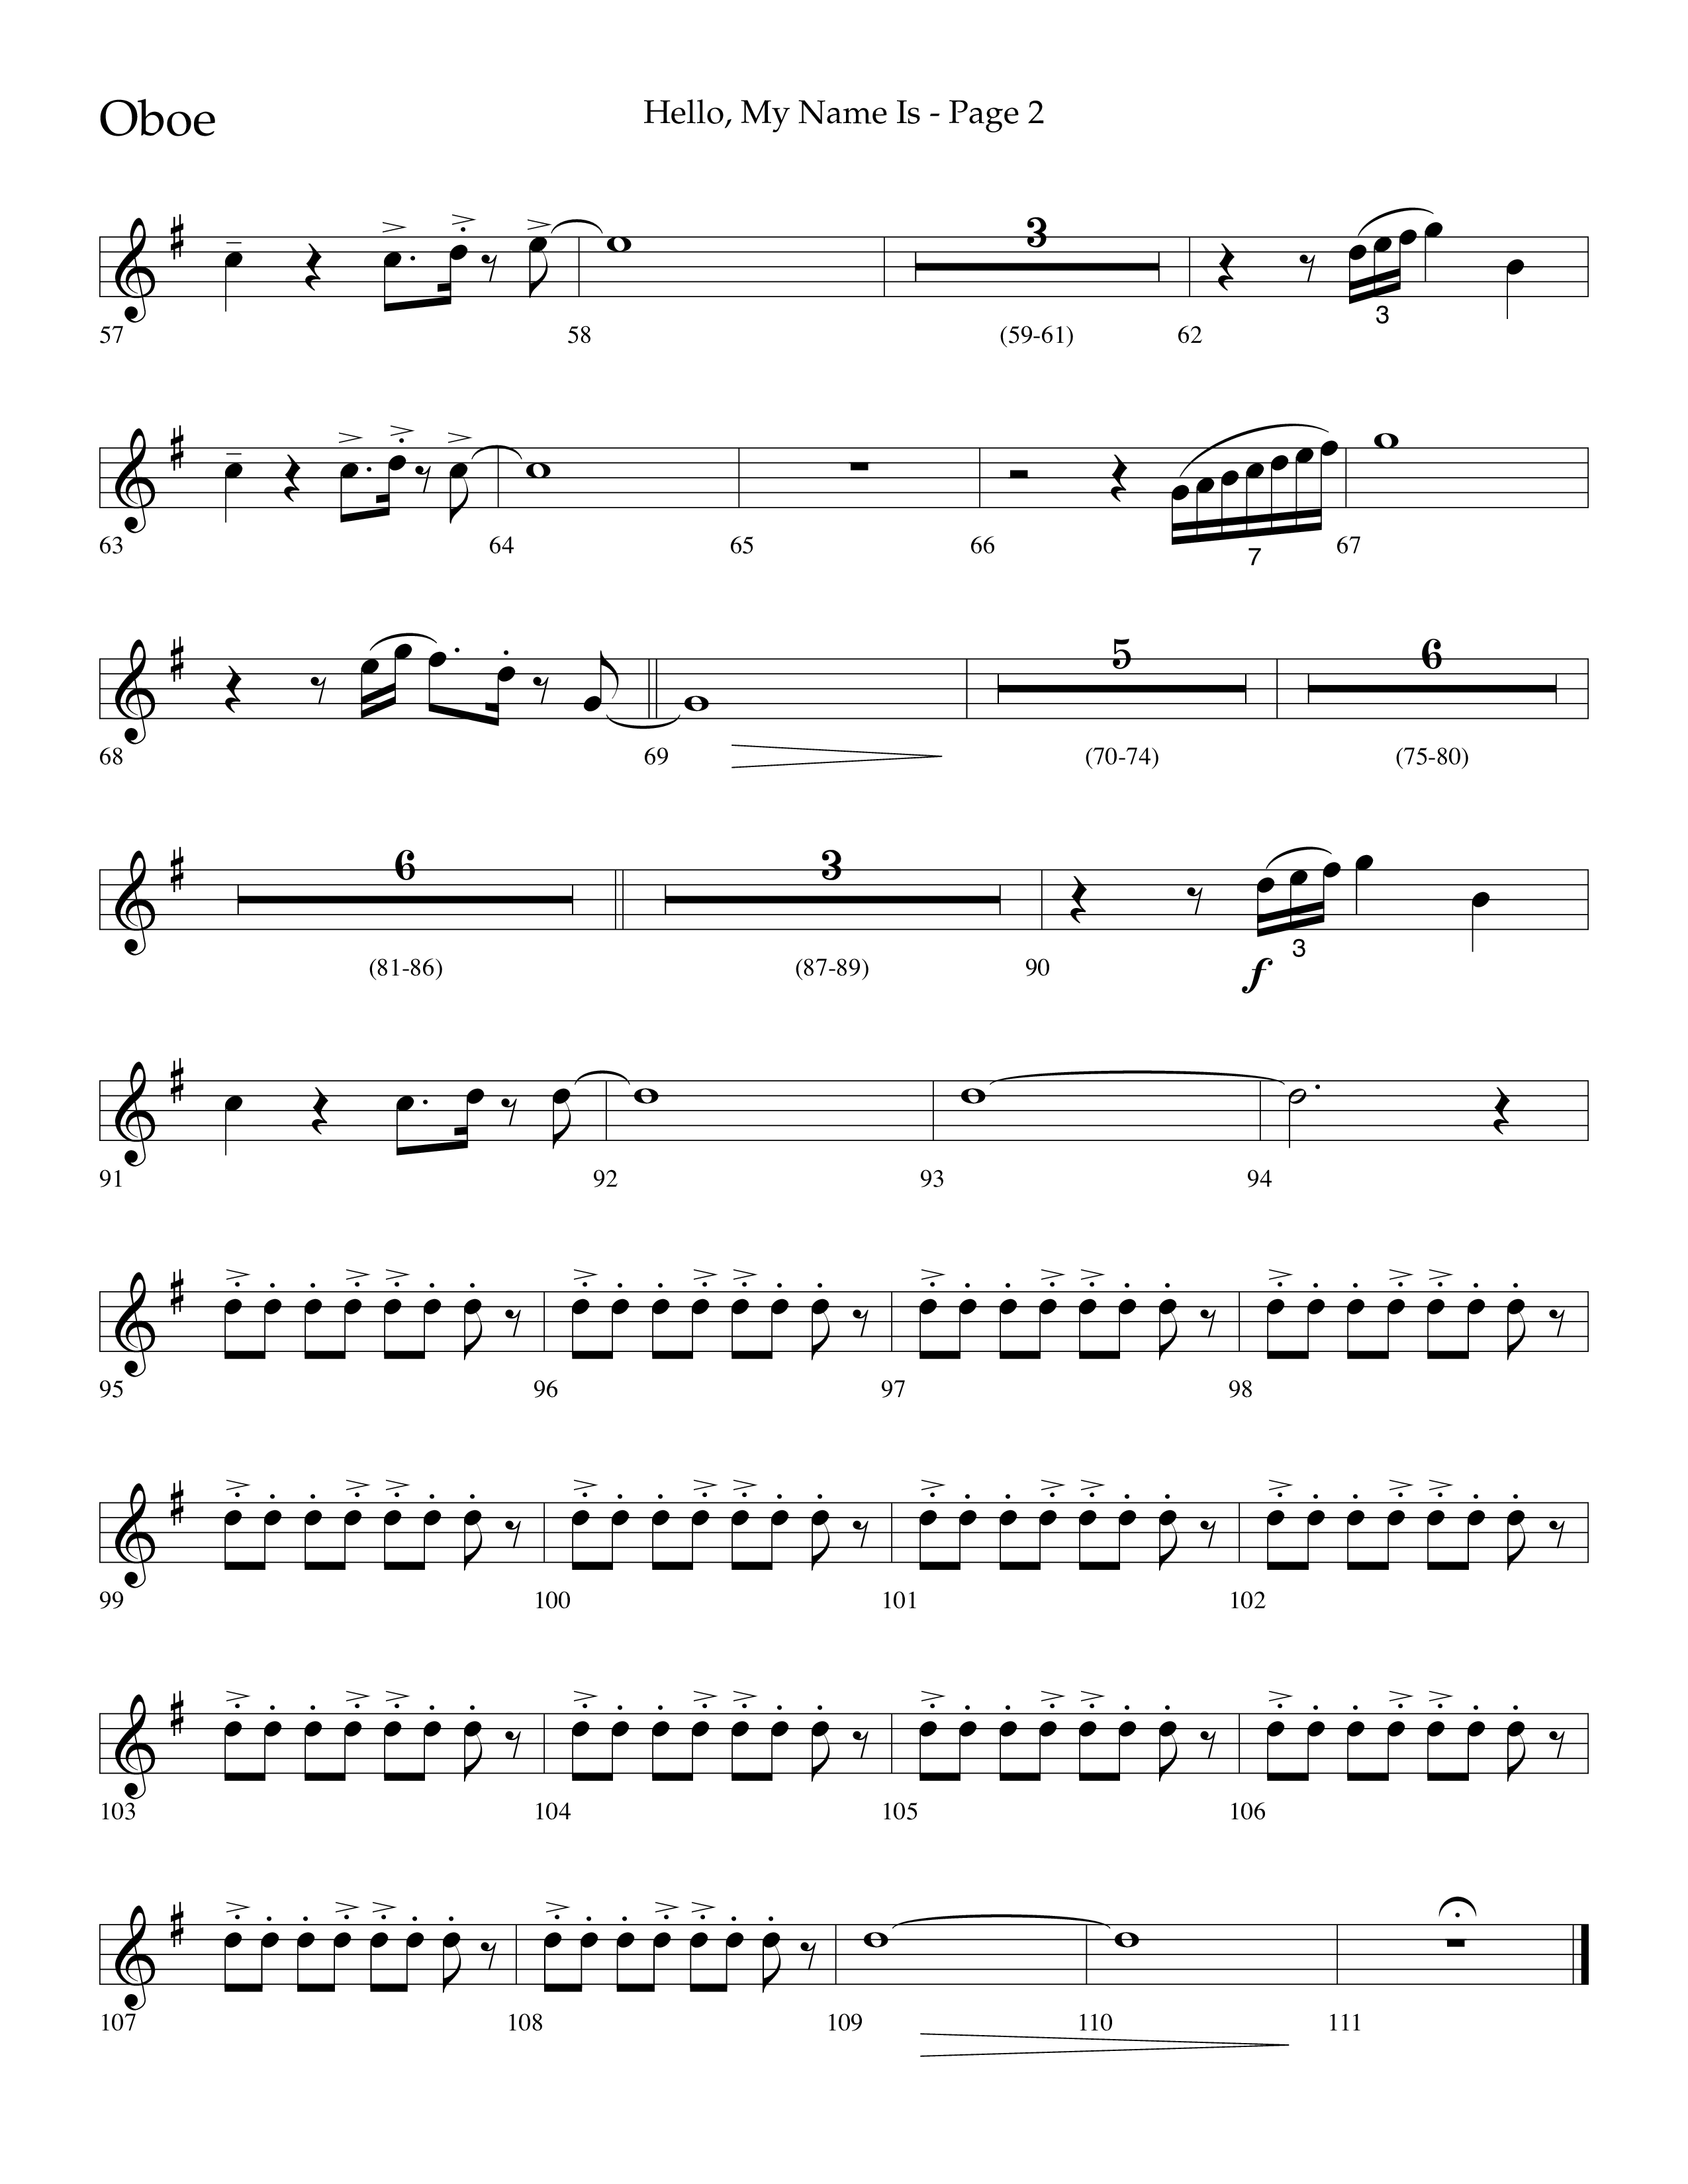 Hello My Name Is (Choral Anthem SATB) Oboe (Lifeway Choral / Arr. Jim Hammerly)